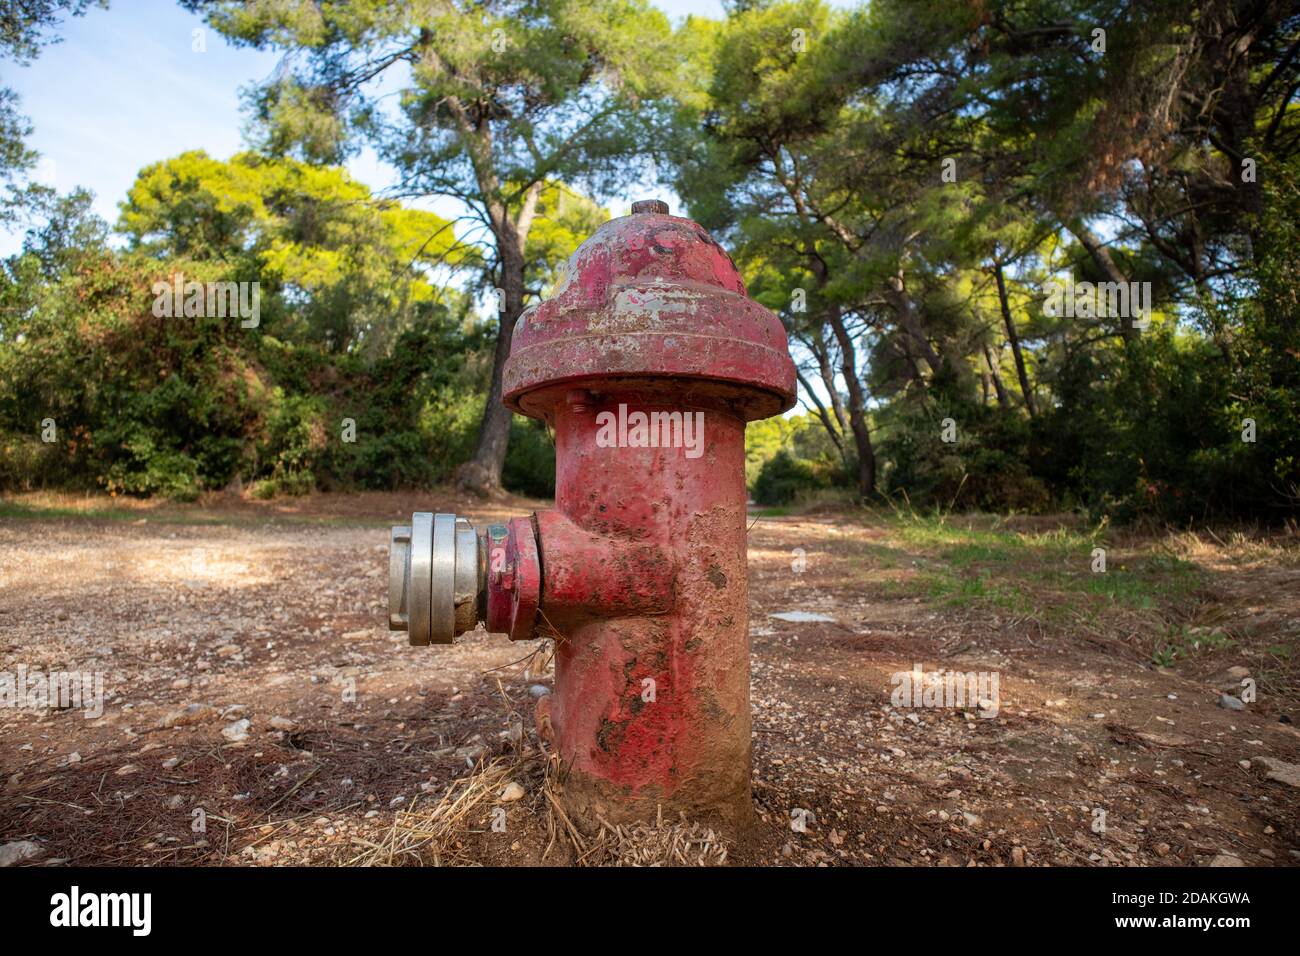 Fire protection concept. Firefighting public system, fire hydrant rusty metal red color outdoors in nature background. Old extinguisher with plug mean Stock Photo